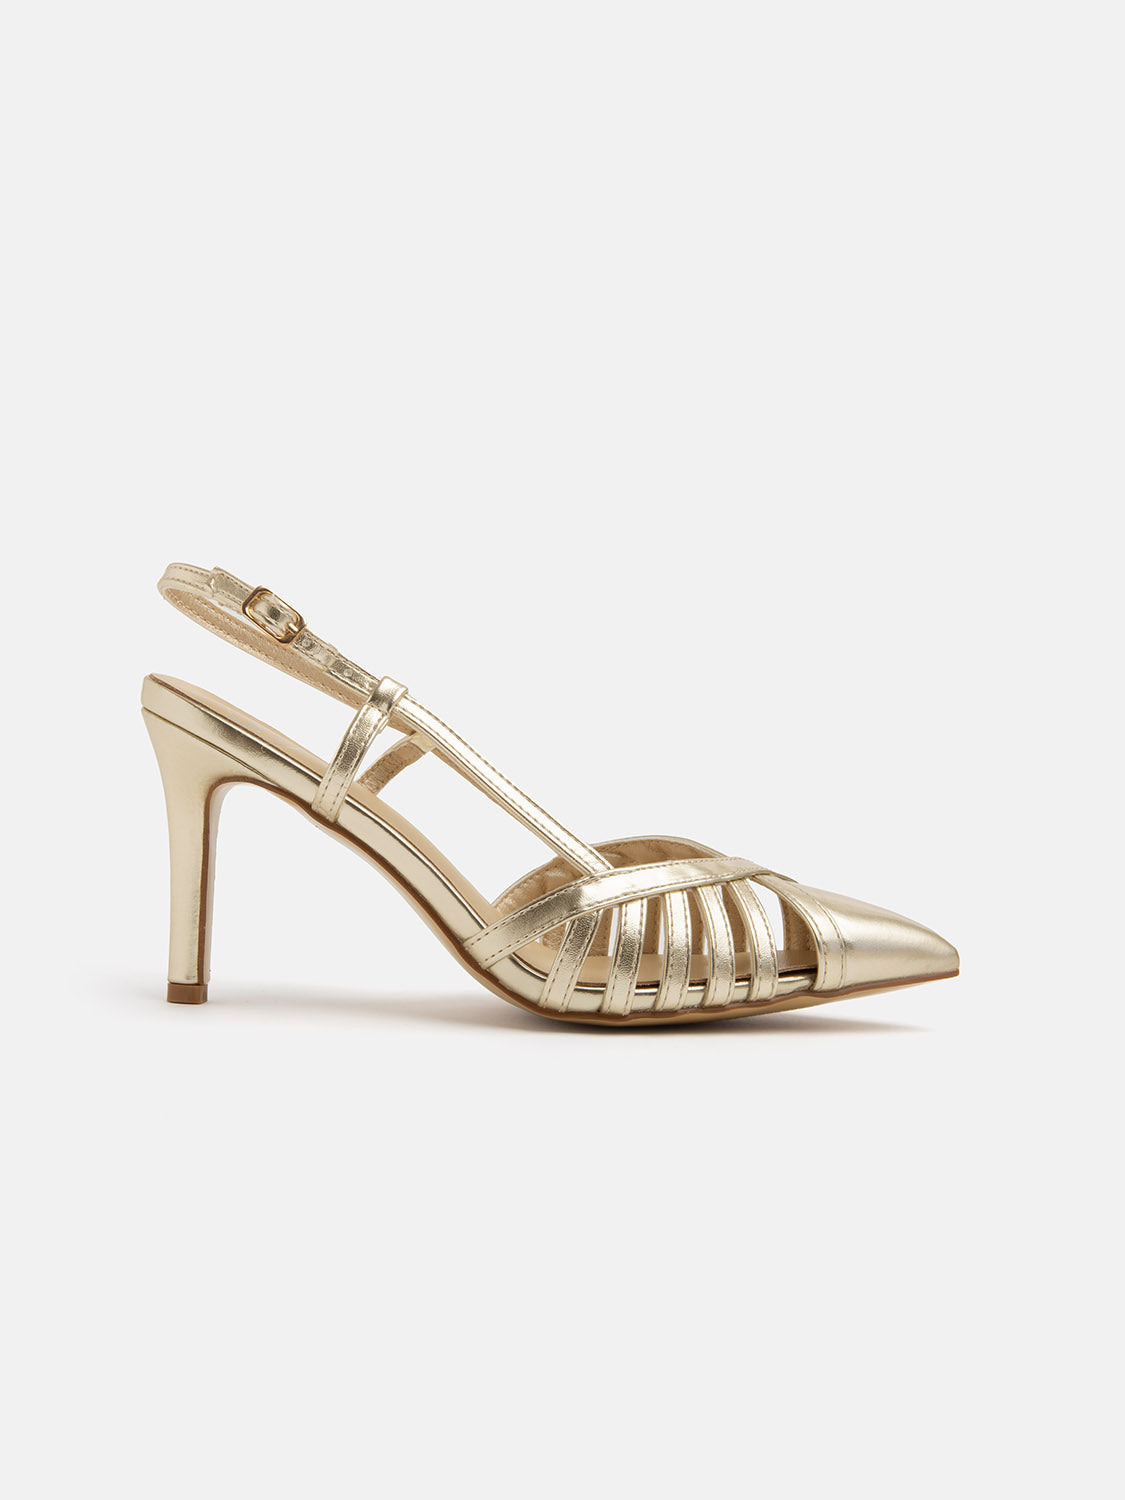 Pumps with stiletto heel and toe with crosses - GOLD